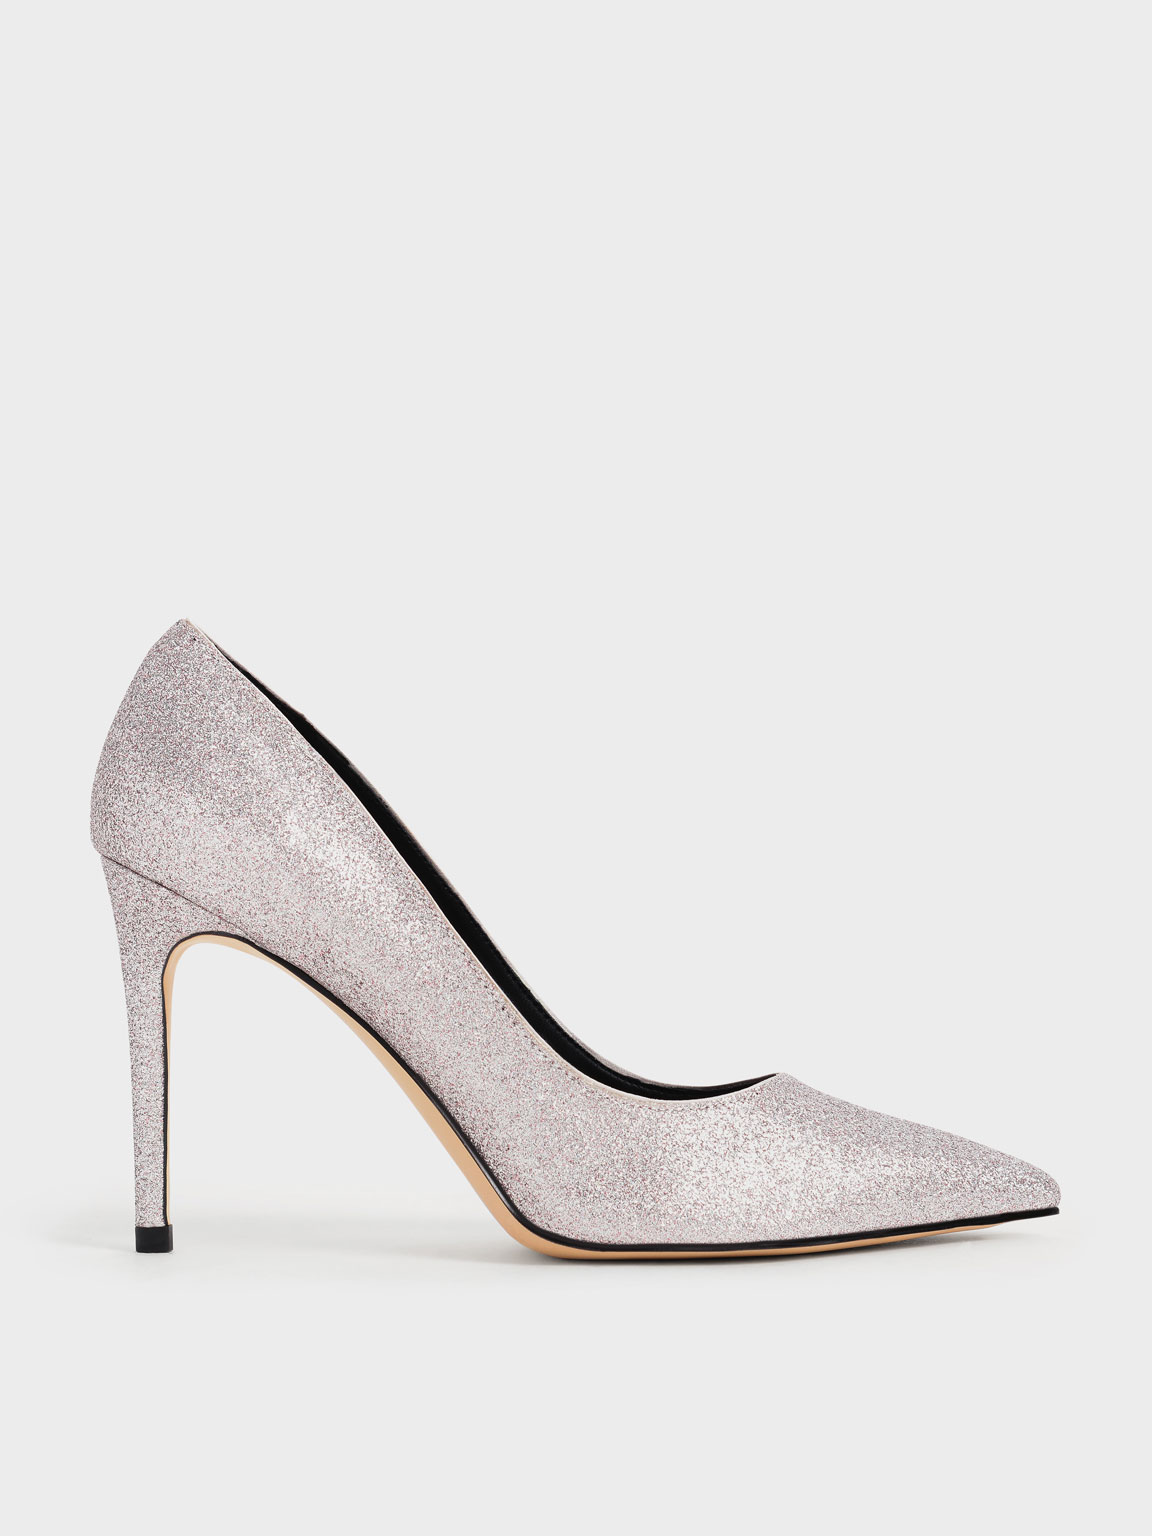 Silver Glitter Pumps - CHARLES & KEITH US